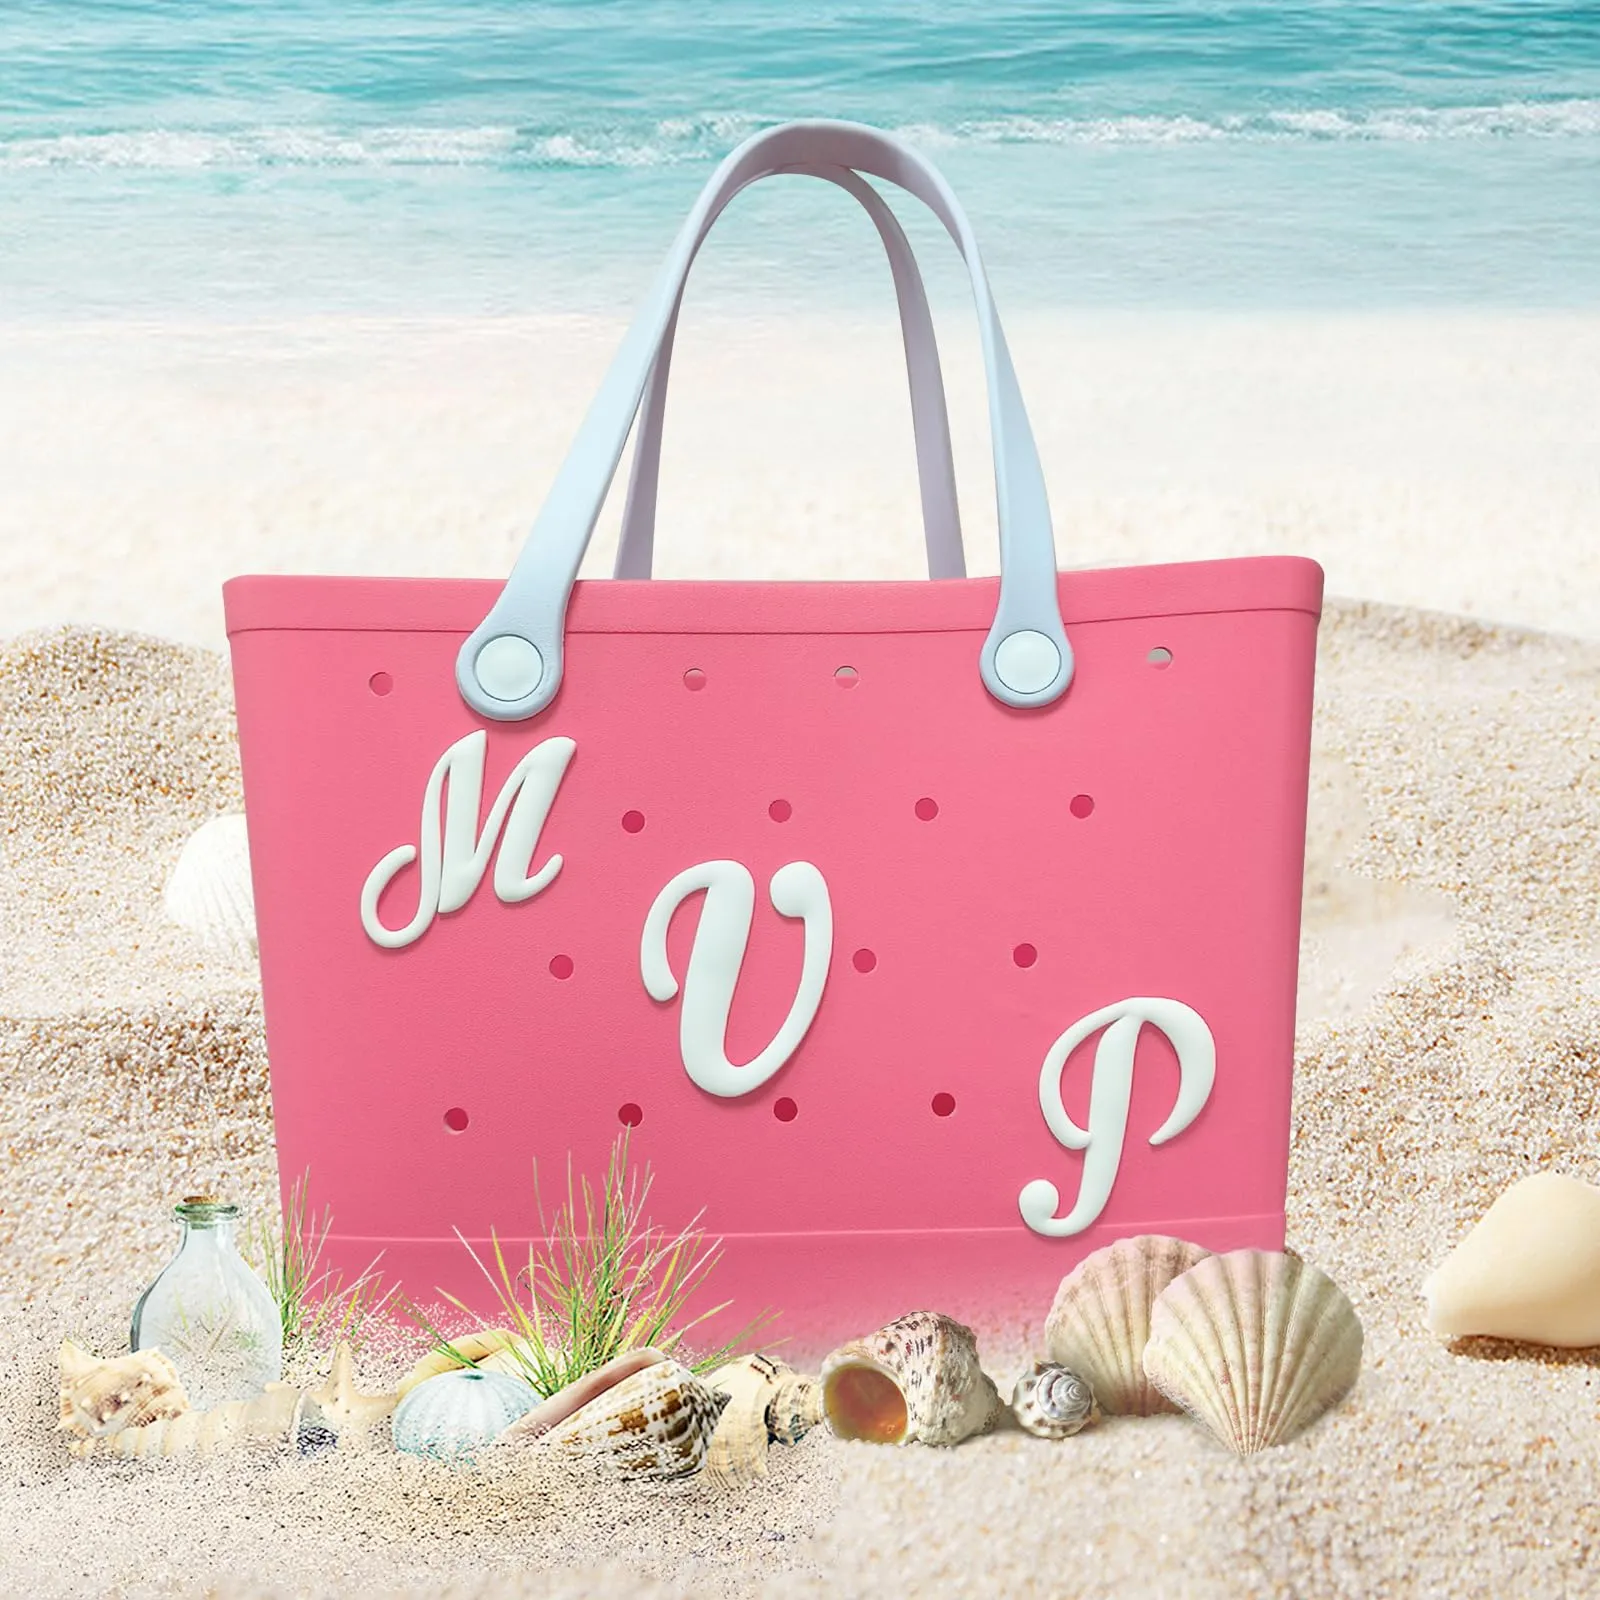 bag charms compatible with bogg bag accessories insert decorative alphabet lettering for bogg bag personalize your beach tote rubber beach bag accessories with alphabet letters u